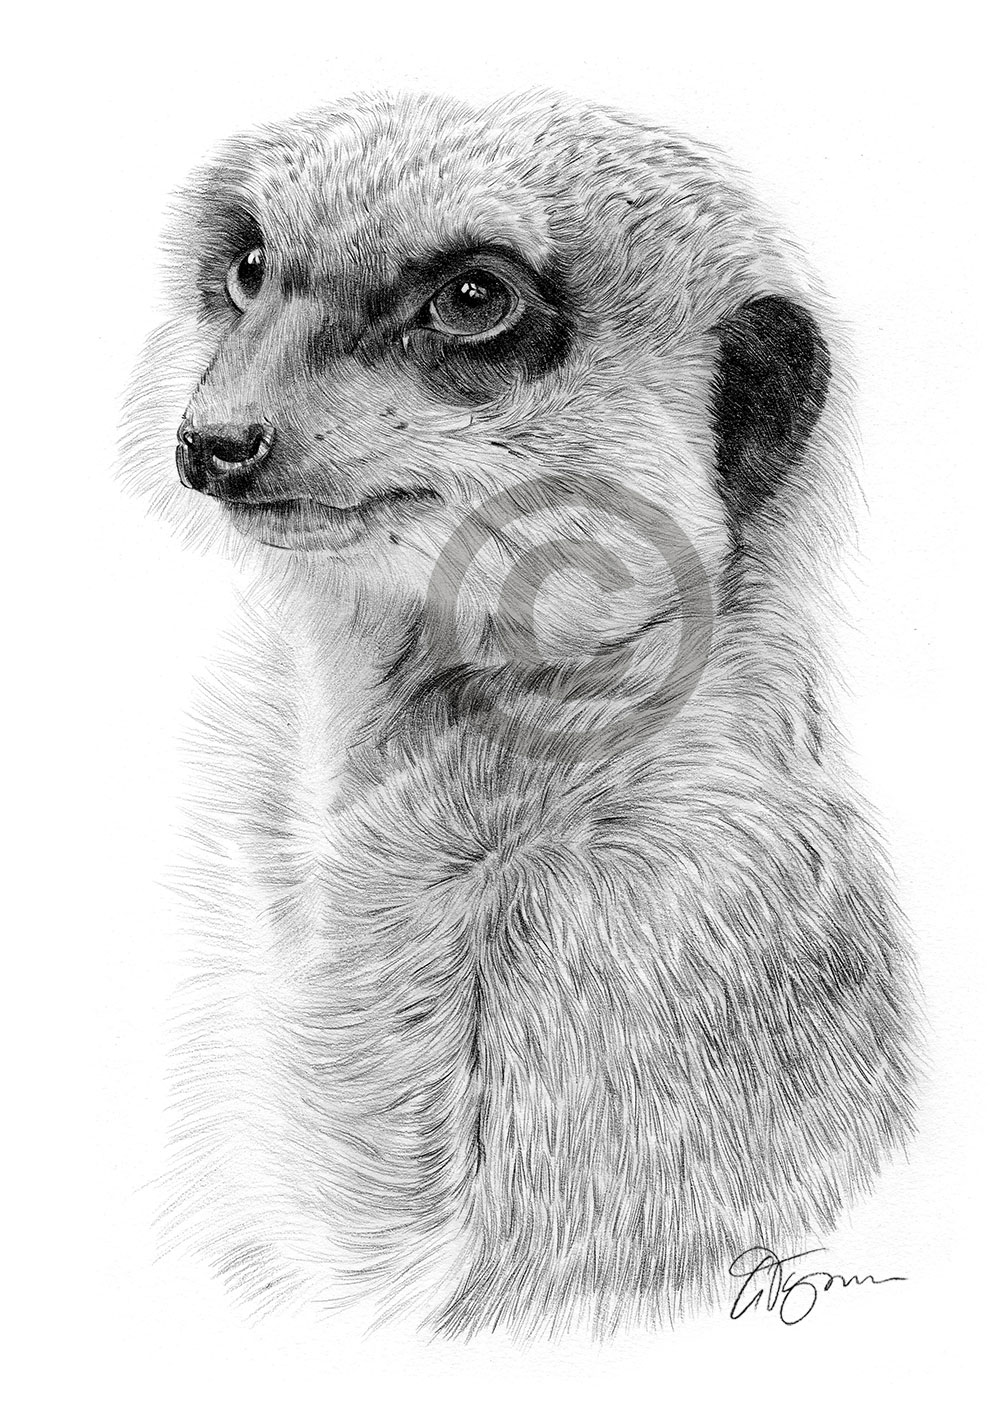 Pencil drawing of an adult meerkat by artist Gary Tymon